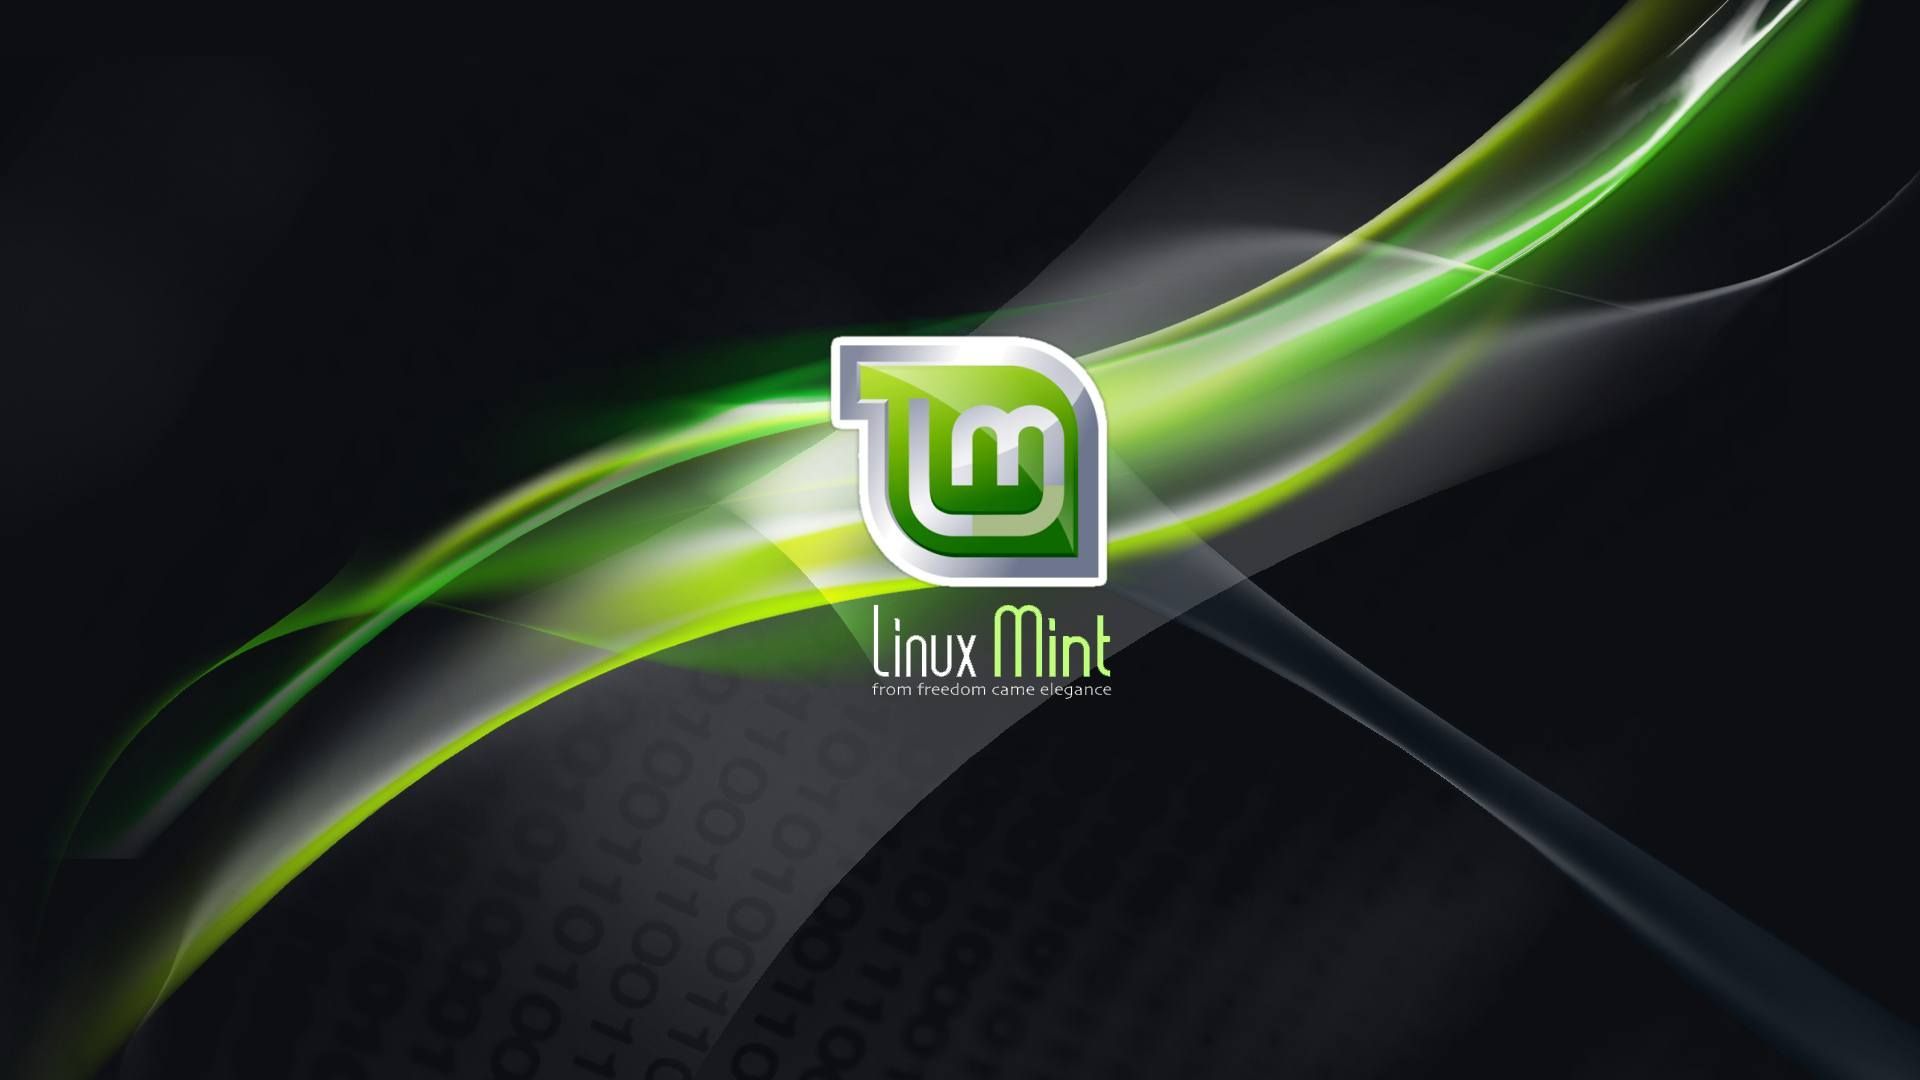 Install Linux Mint and enjoy smooth and safe computing. Linux